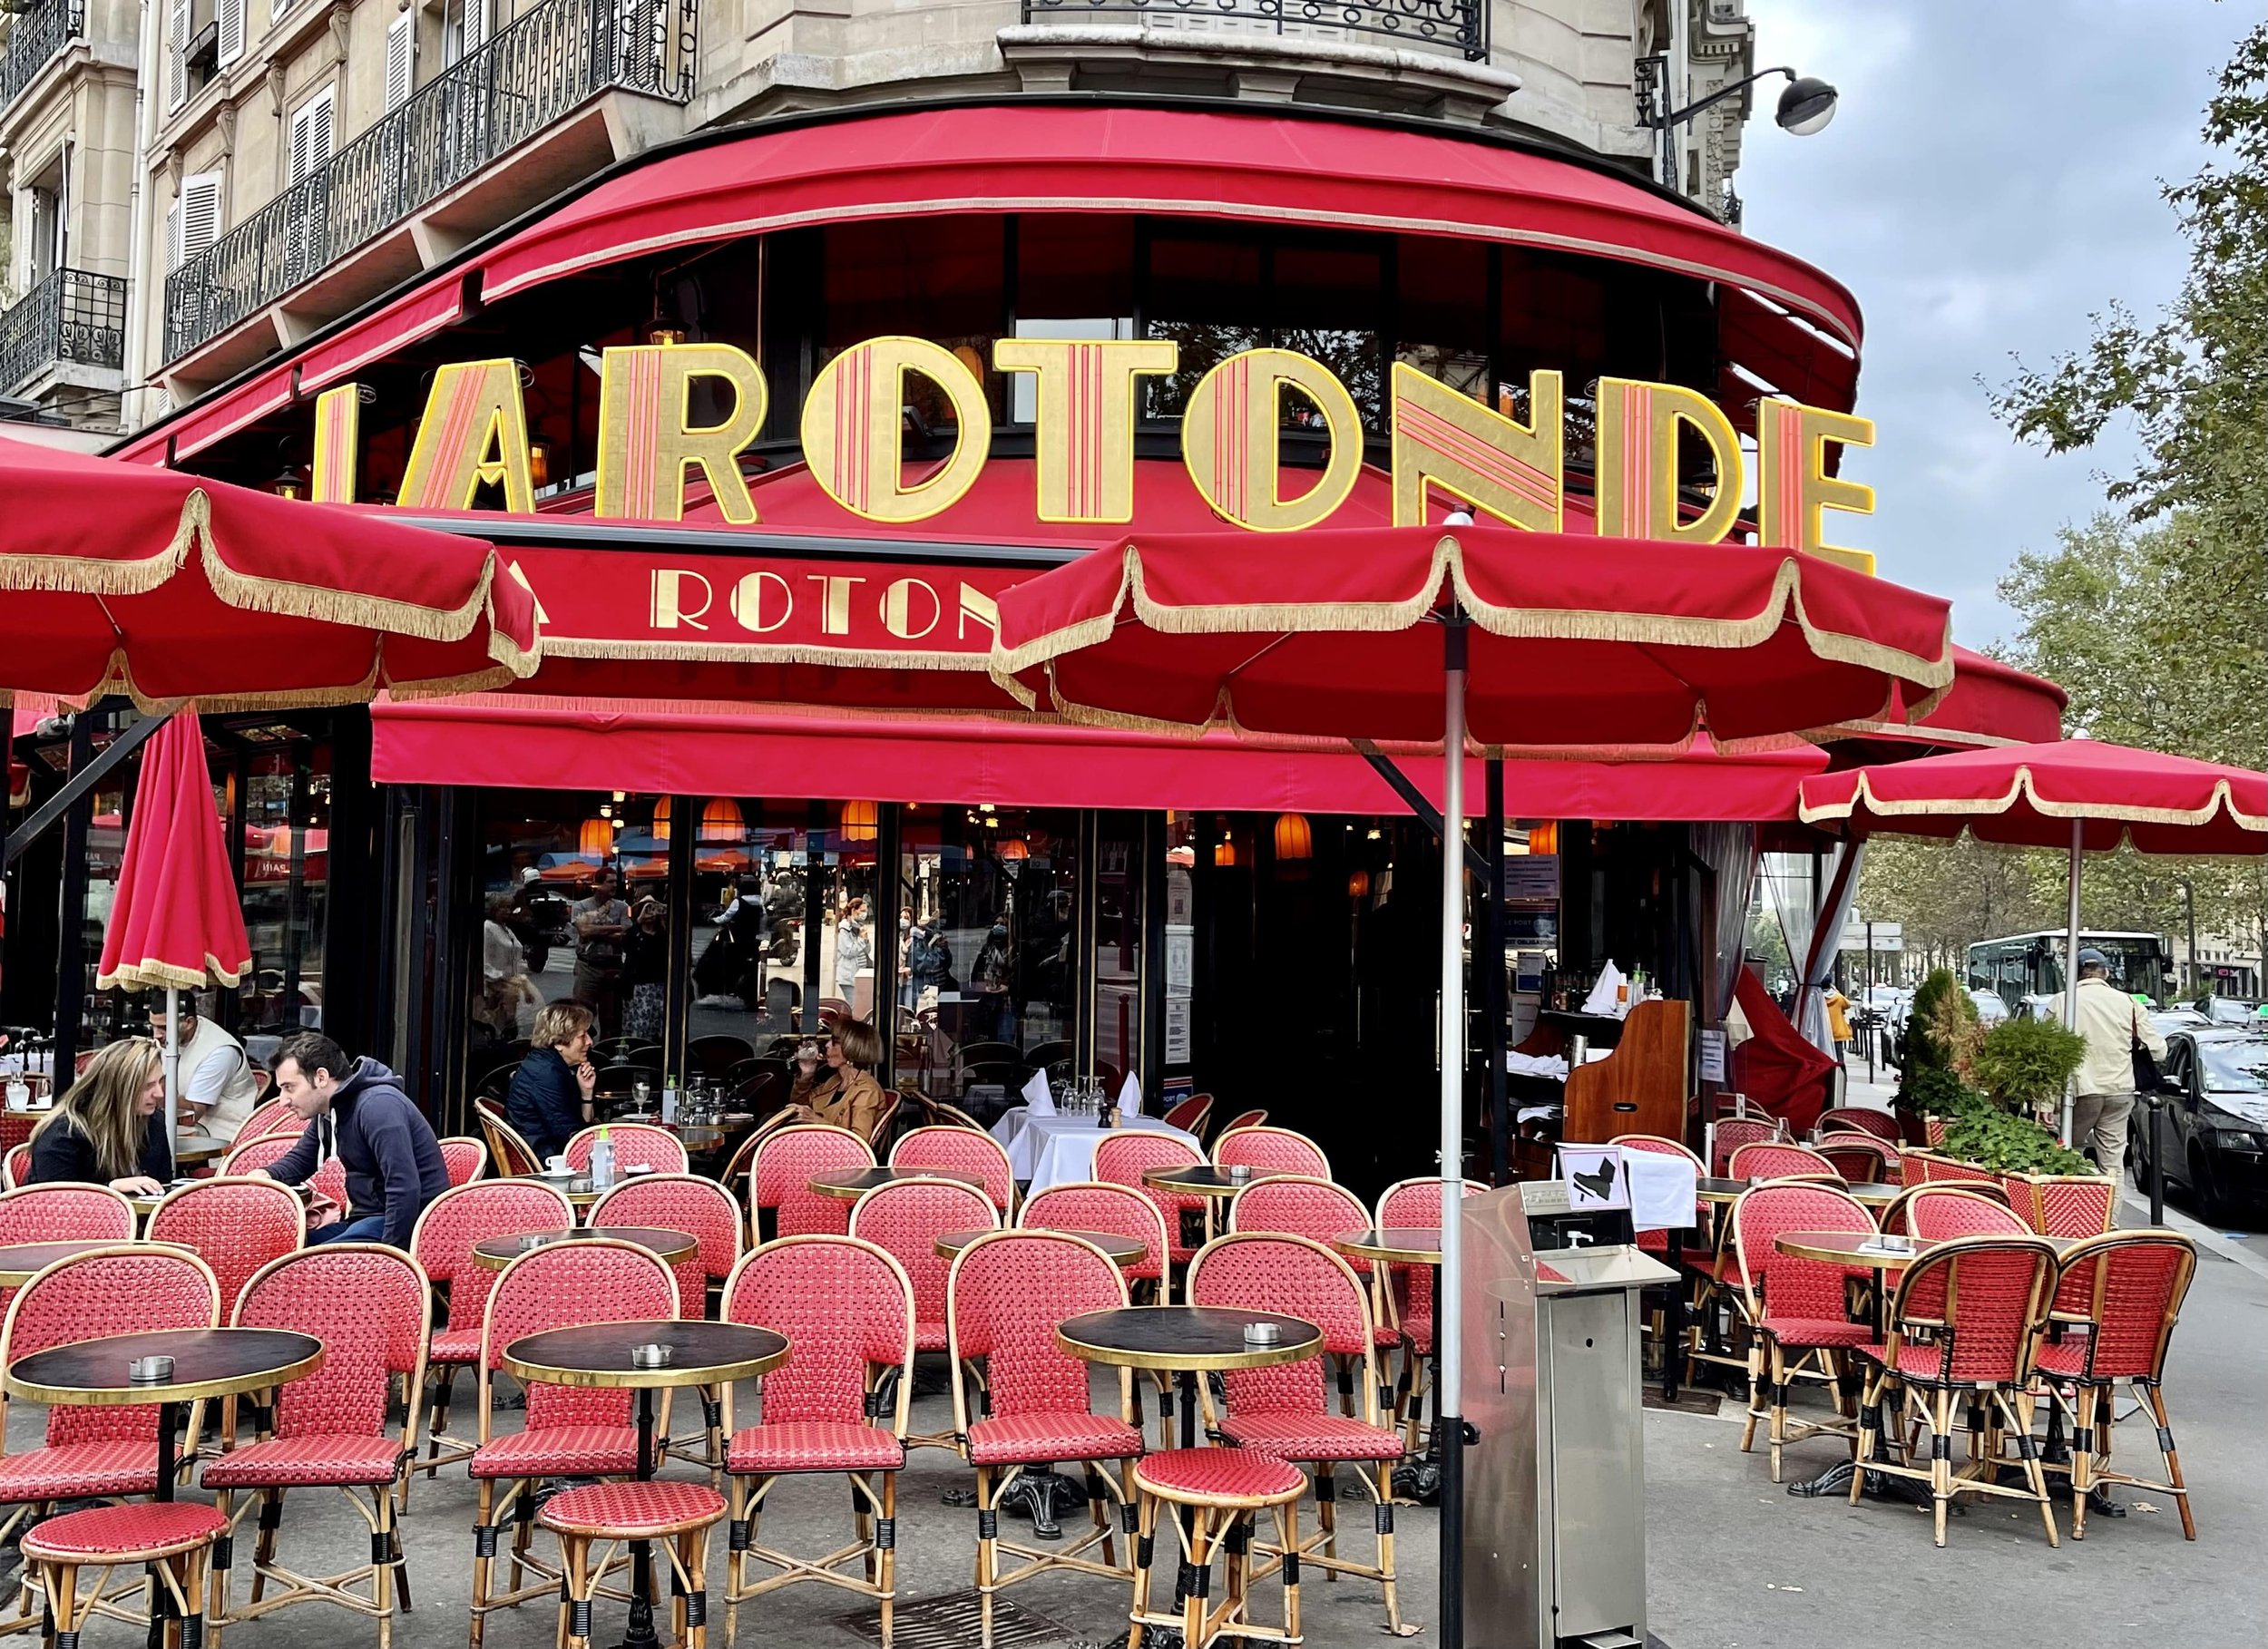 La Rotonde, historically the best cafe in Paris for starving artists